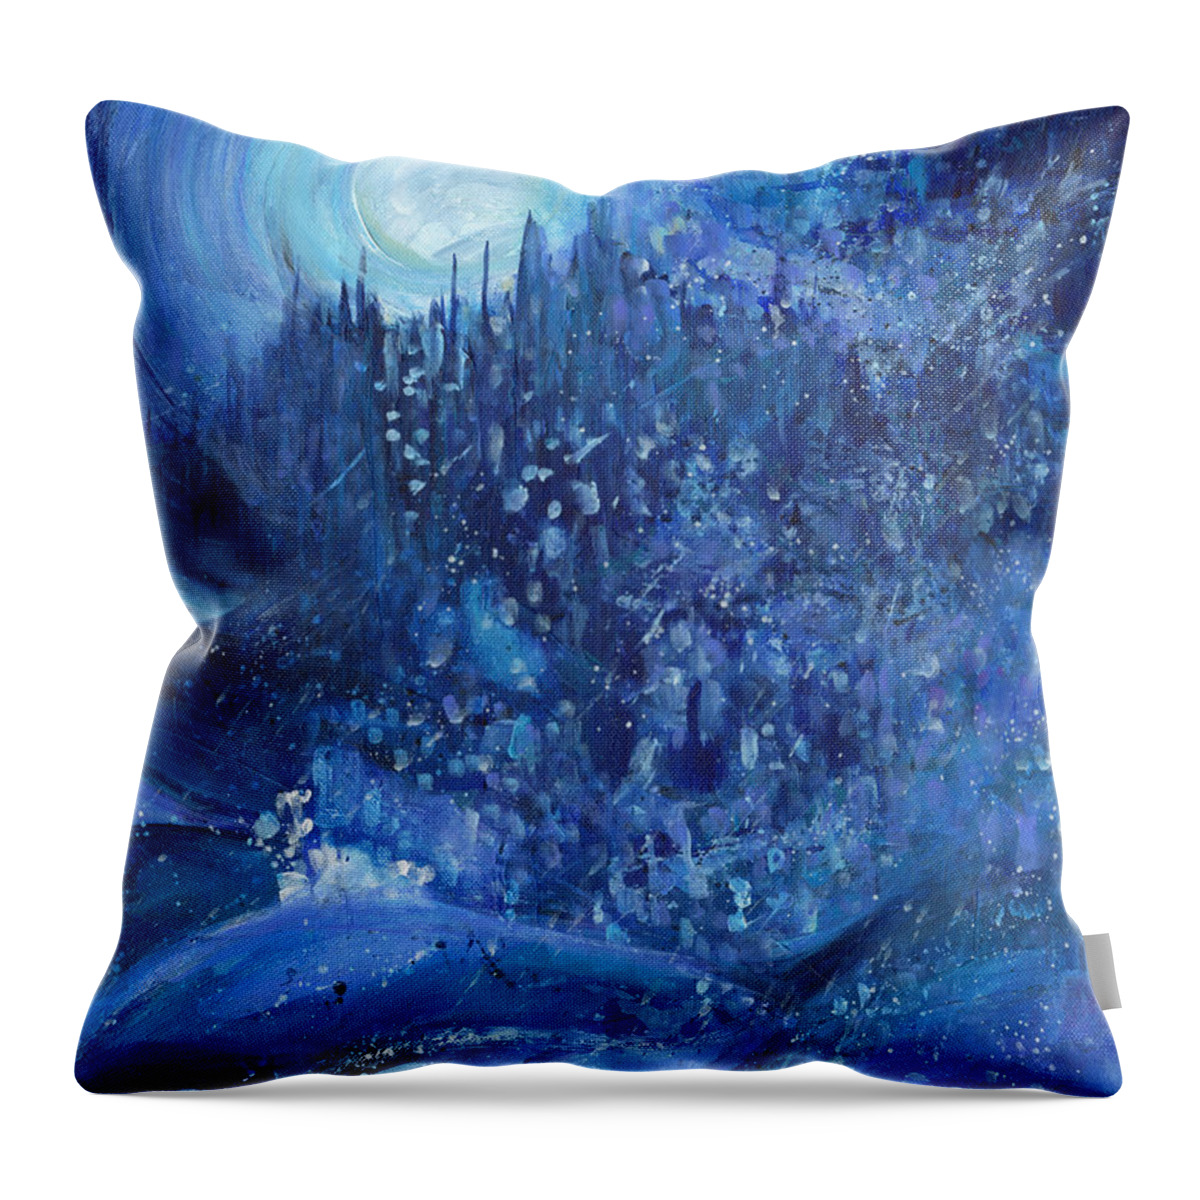 Contemporary Throw Pillow featuring the painting Snowstorm by Tanya Filichkin